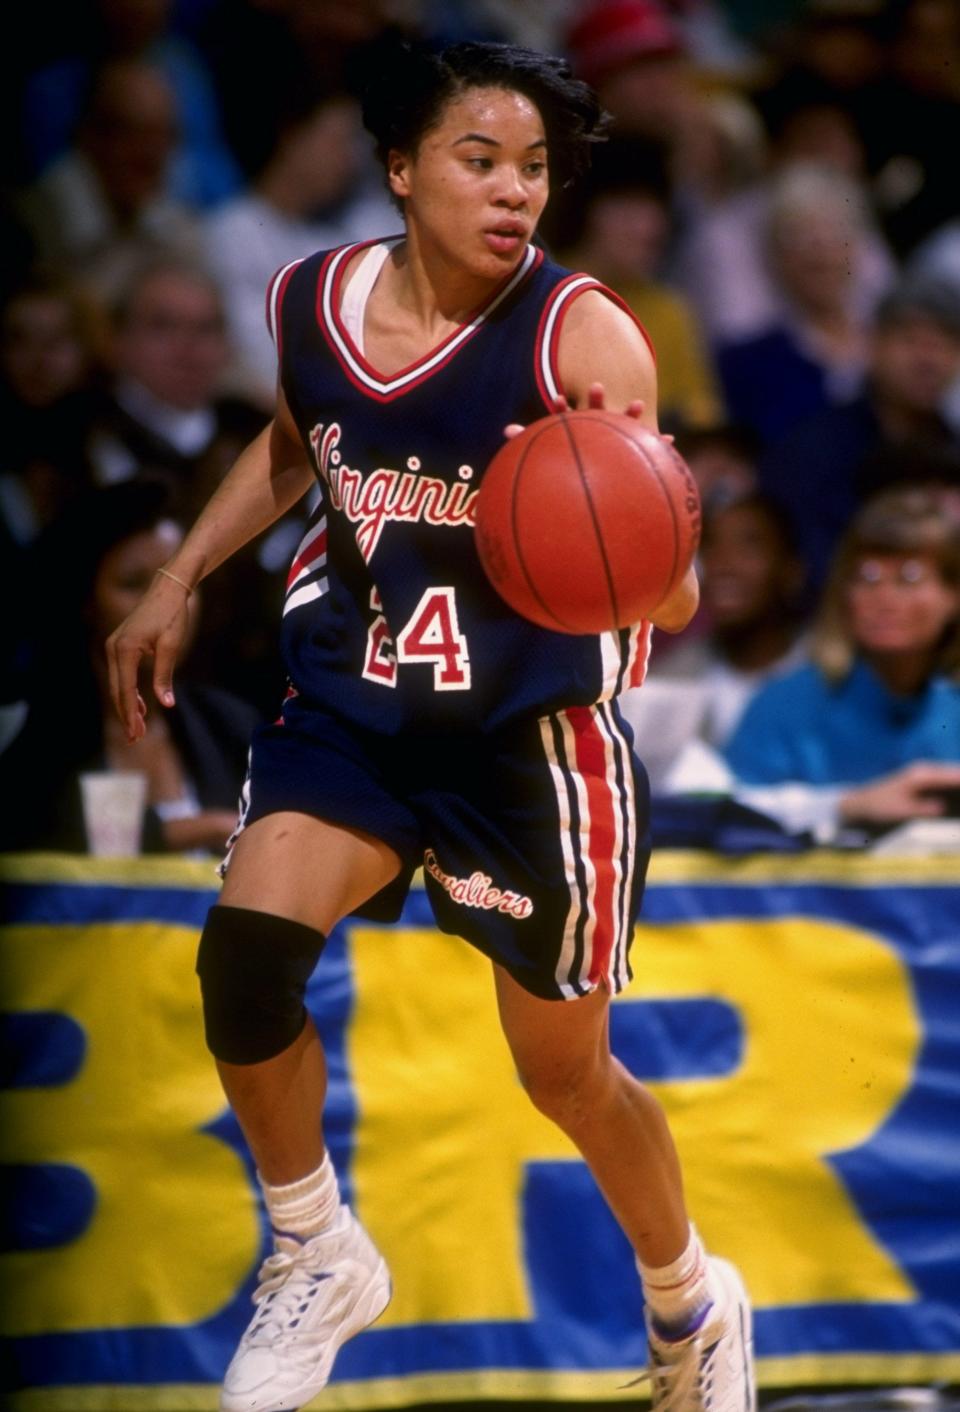 Dawn Staley, shown during a Virginia Cavaliers game on Dec. 28, 1991.